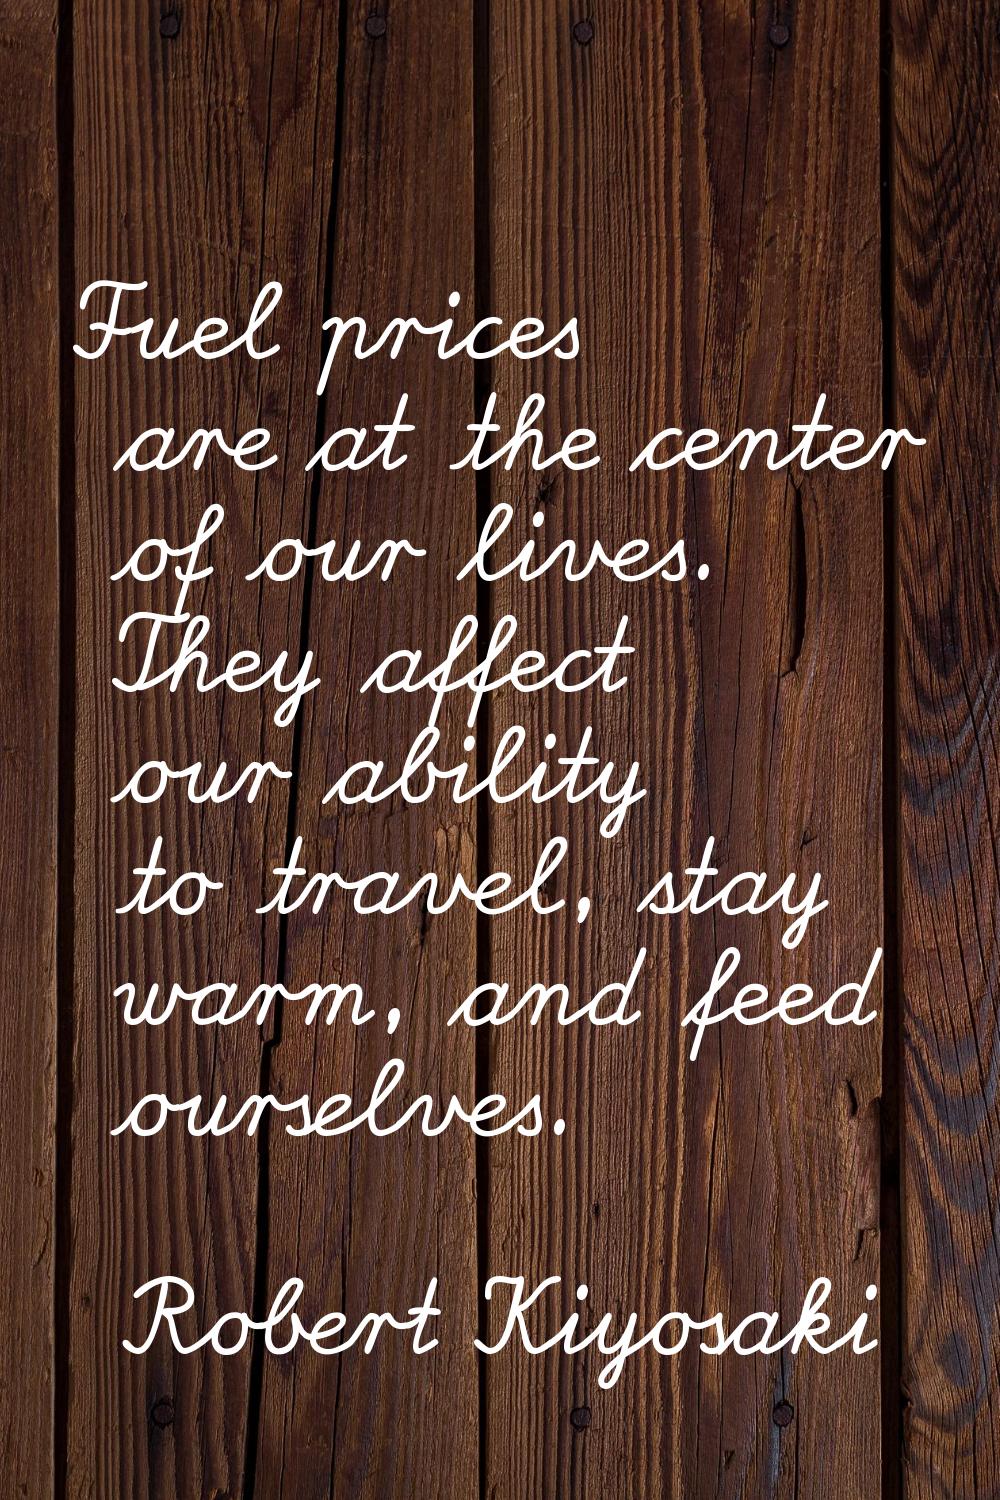 Fuel prices are at the center of our lives. They affect our ability to travel, stay warm, and feed 